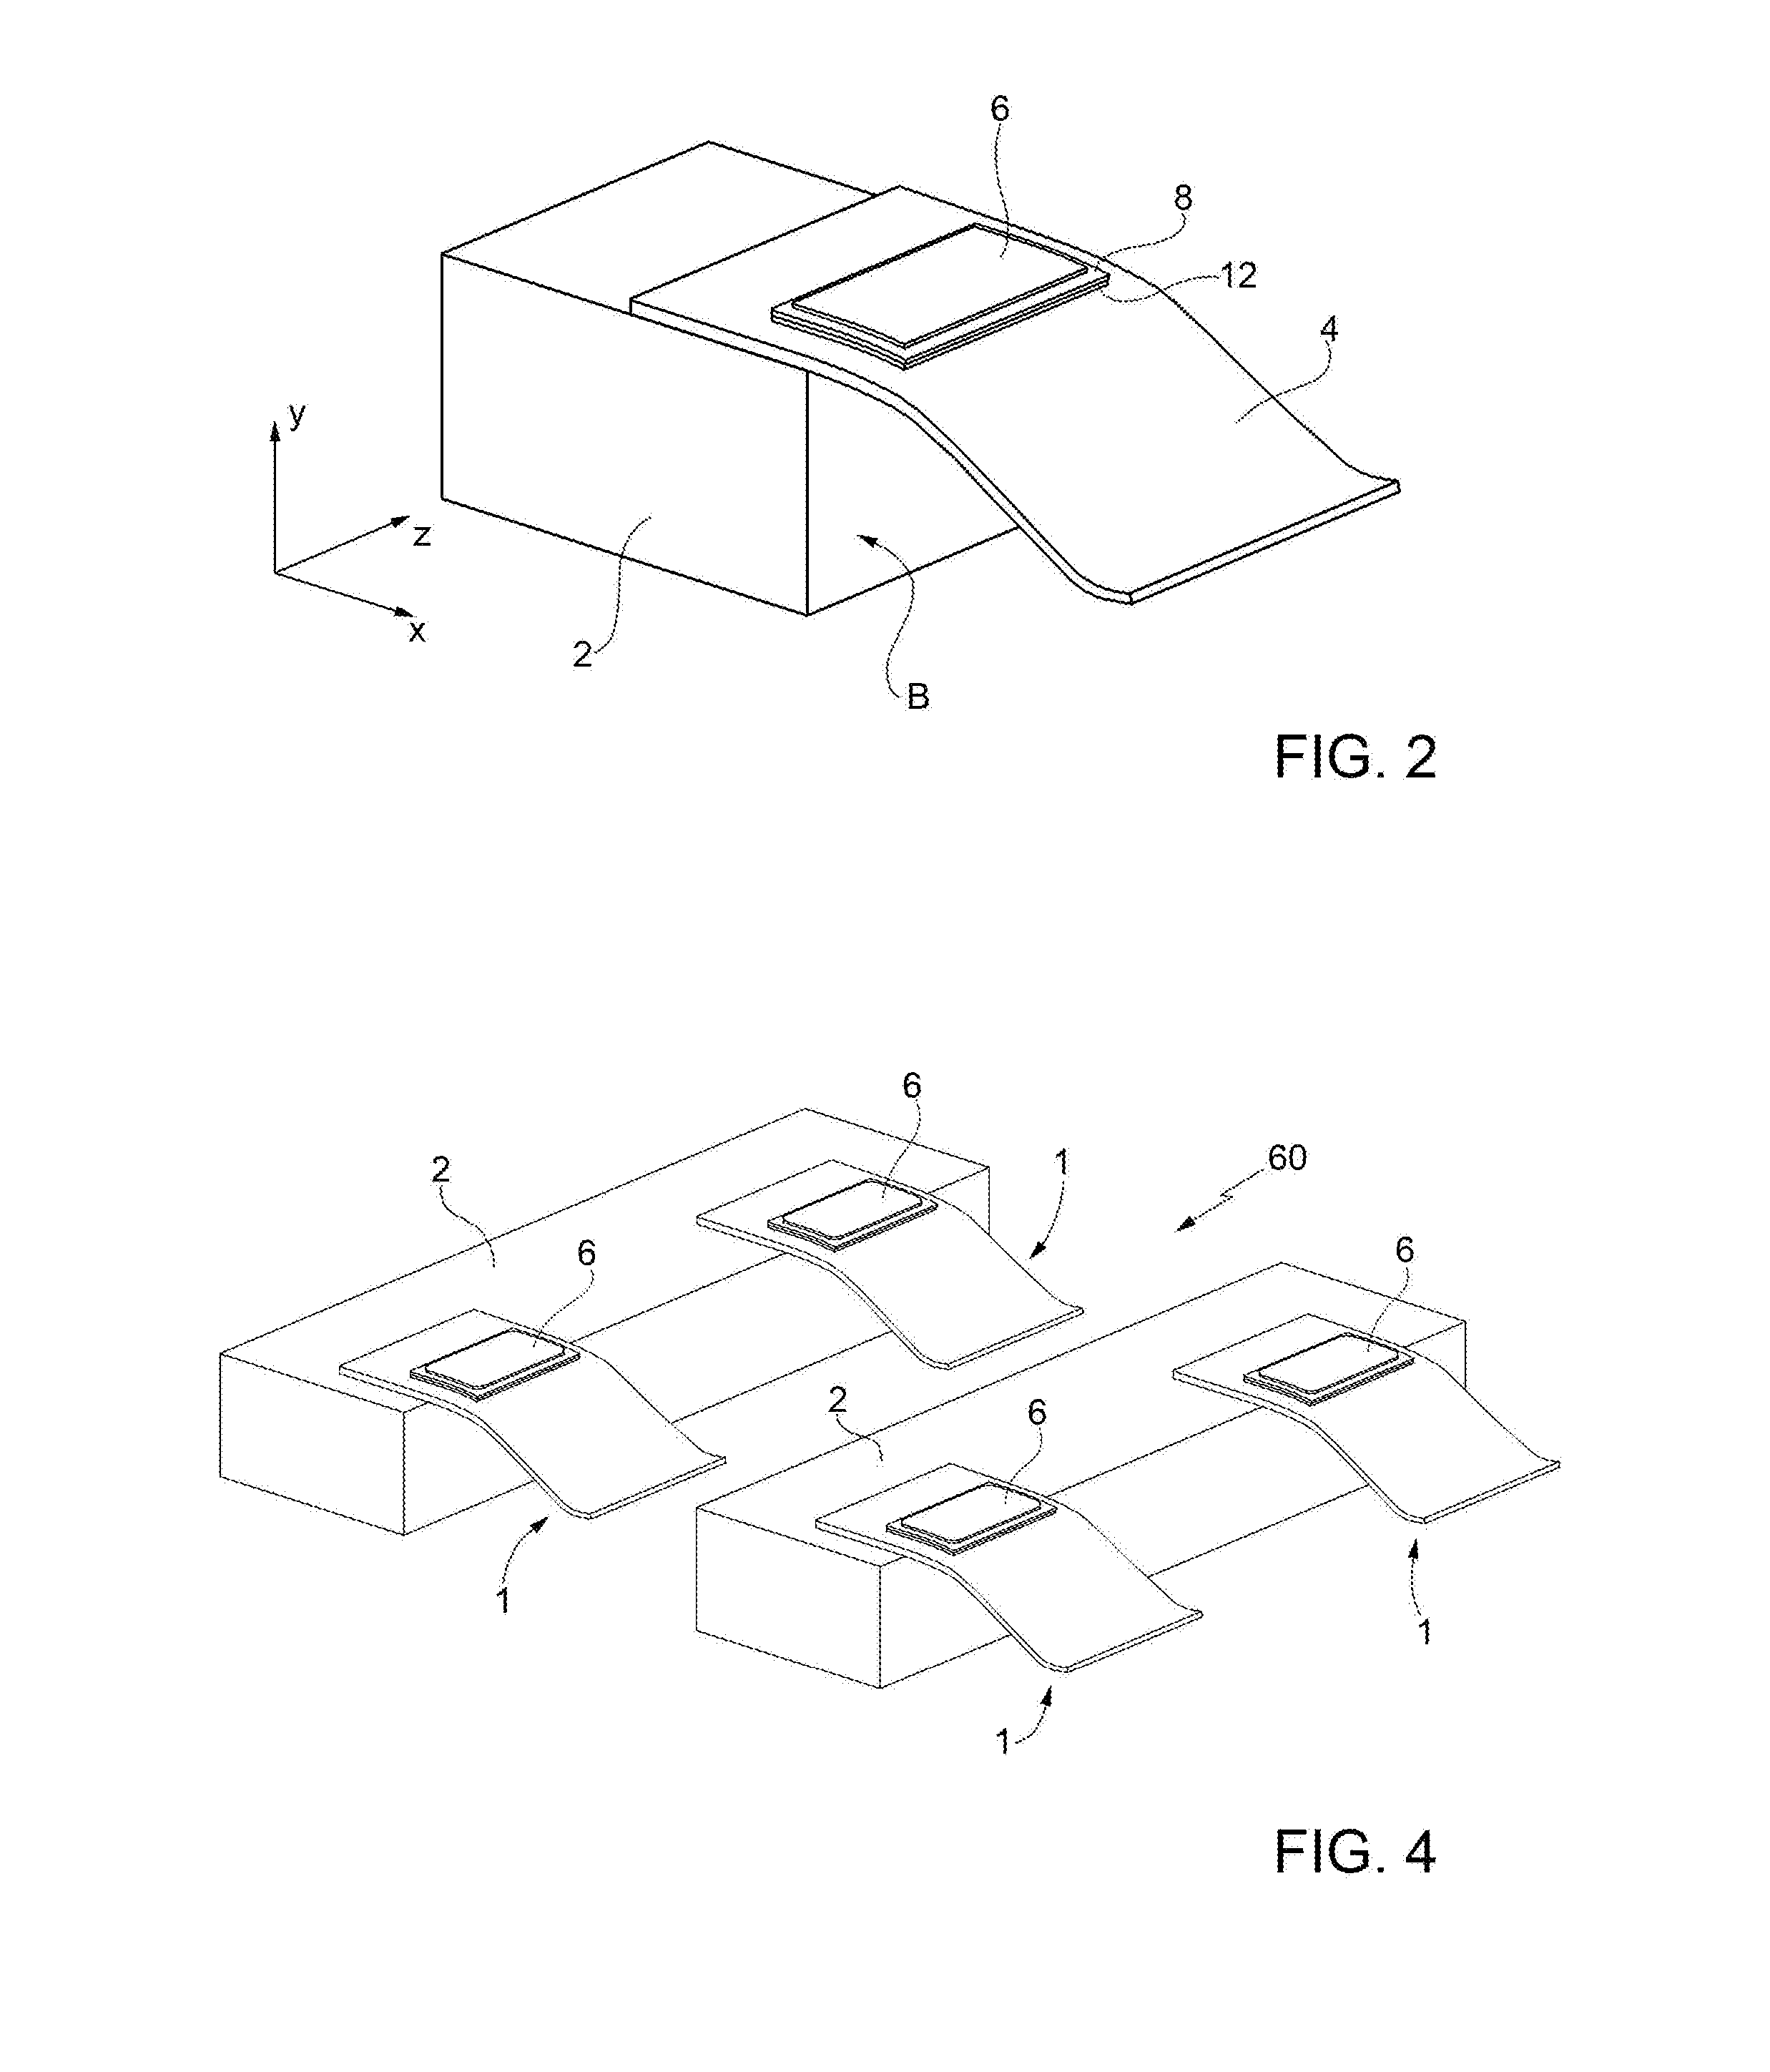 Device for harvesting energy from a fluidic flow including a thin film of piezoelectric material